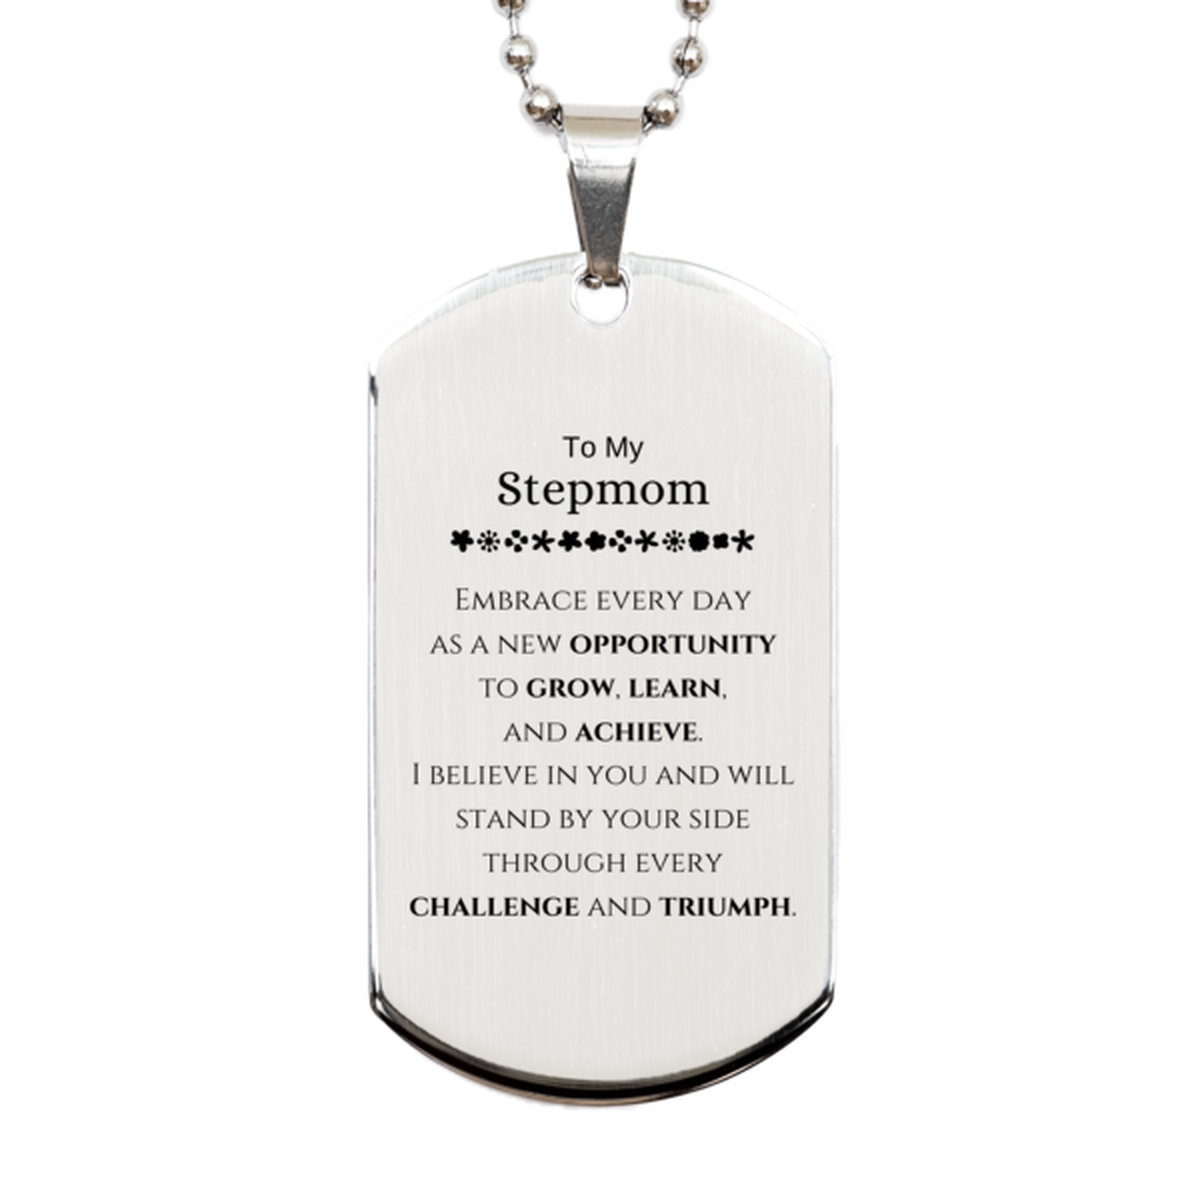 To My Stepmom Gifts, I believe in you and will stand by your side, Inspirational Silver Dog Tag For Stepmom, Birthday Christmas Motivational Stepmom Gifts